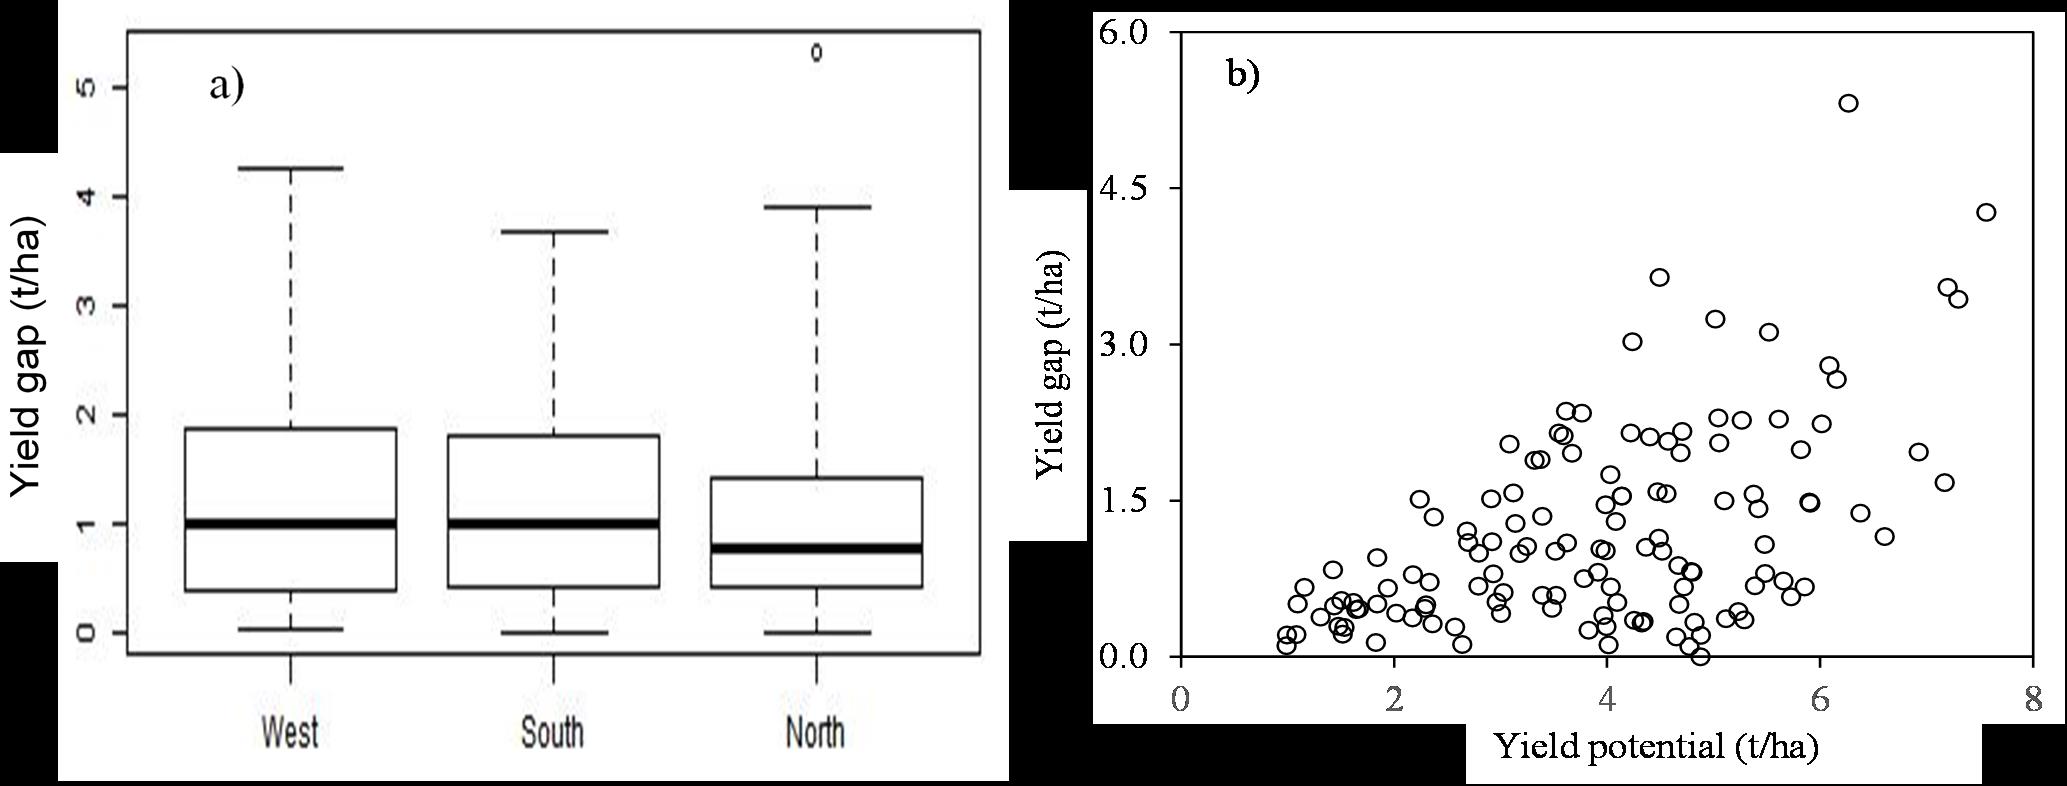 Scatter graph of yield potential and box plot of distribution 